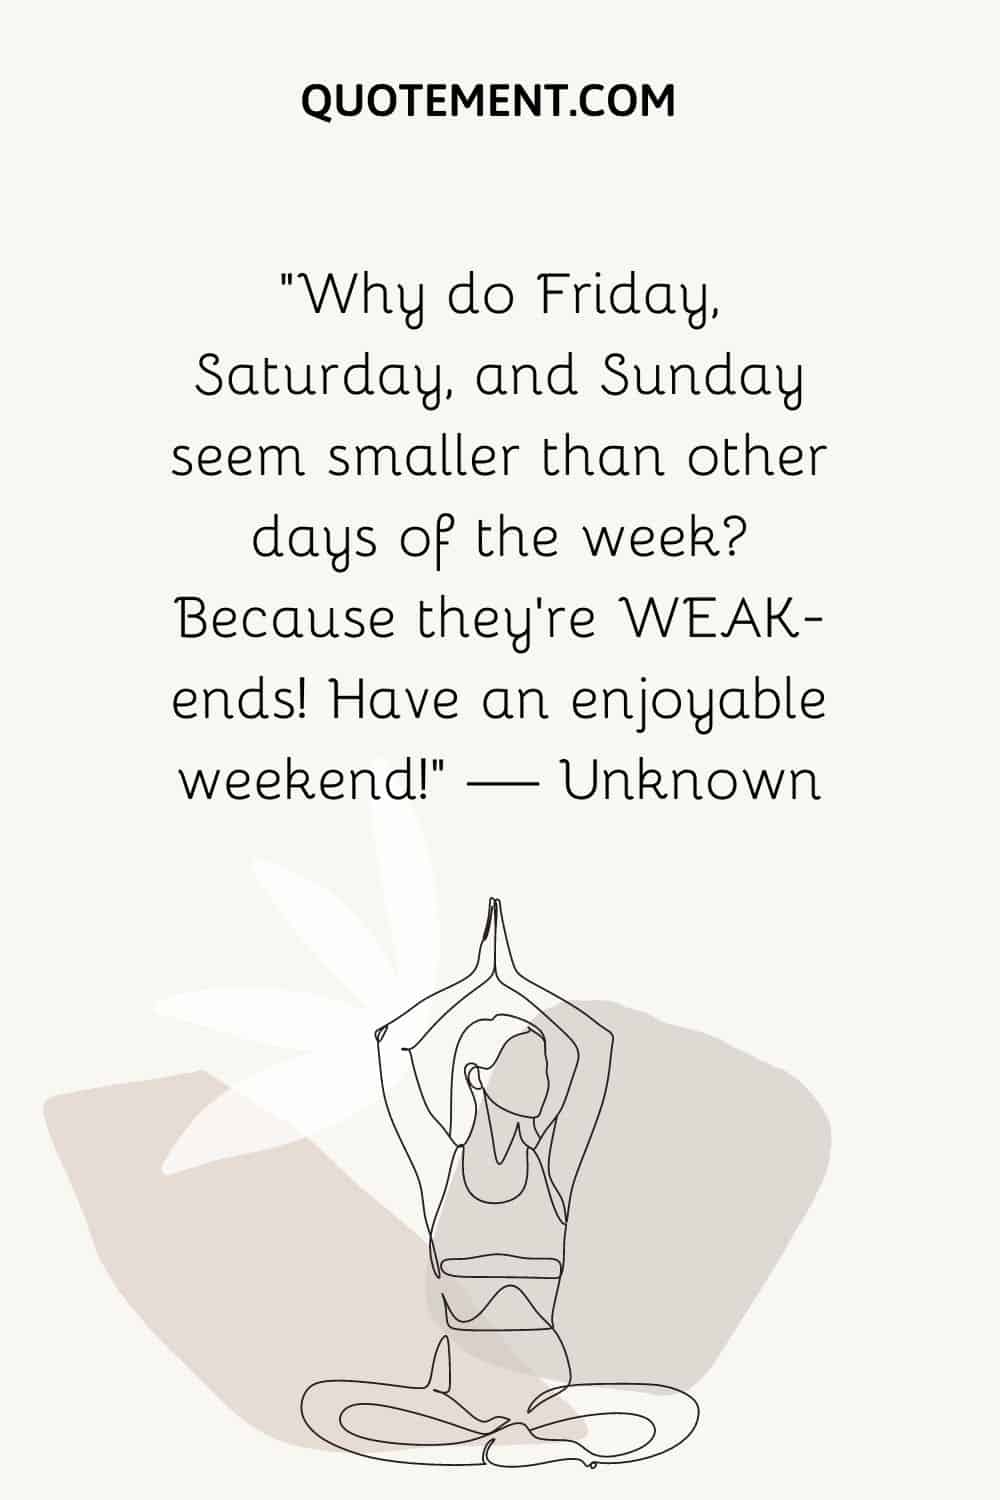 “Why do Friday, Saturday, and Sunday seem smaller than other days of the week Because they’re WEAK-ends! Have an enjoyable weekend!” — Unknown